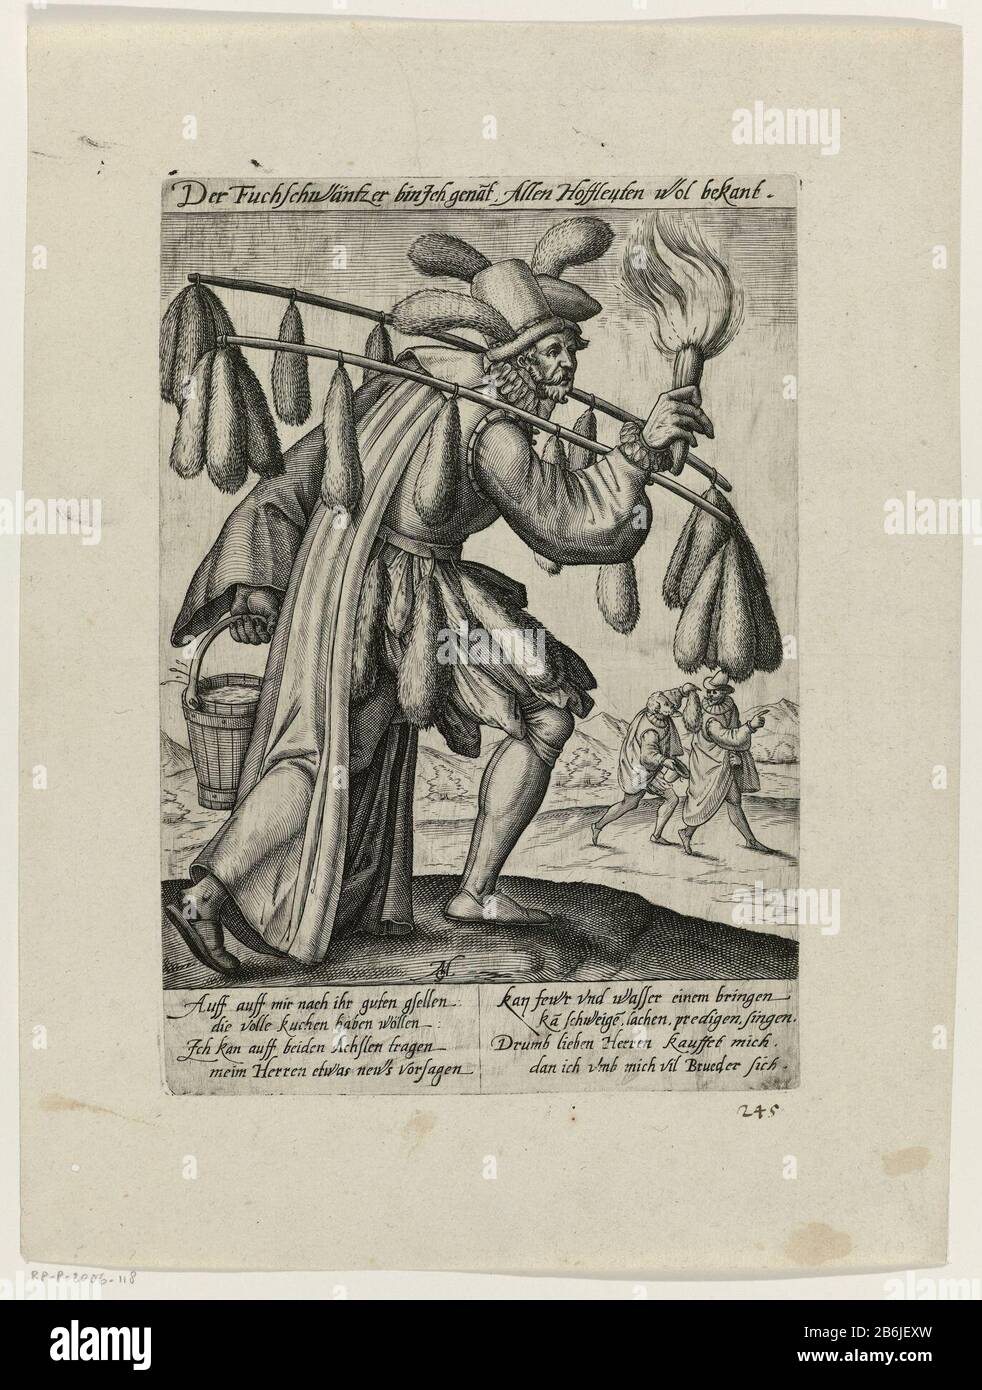 dealers fox tails wearing his Where: a belt around his waist and tied to two sticks over his shoulders. In one hand a bucket of water, in the other hand a burning torch. In the background a man holding a second gentleman holds a foxtail. With signature in the Duits. Manufacturer : print maker: Matthew Greuter (indicated on object) Dating: after 1574 - for 1596 Material: paper Technique: engra (printing process) / plate tone measurements: plate edge: H 234 mm × W 165 mmToelichtingAangezien Fuchsschwanz in German, in addition to foxtail also means flattery, the foxtail seller should probably be Stock Photo